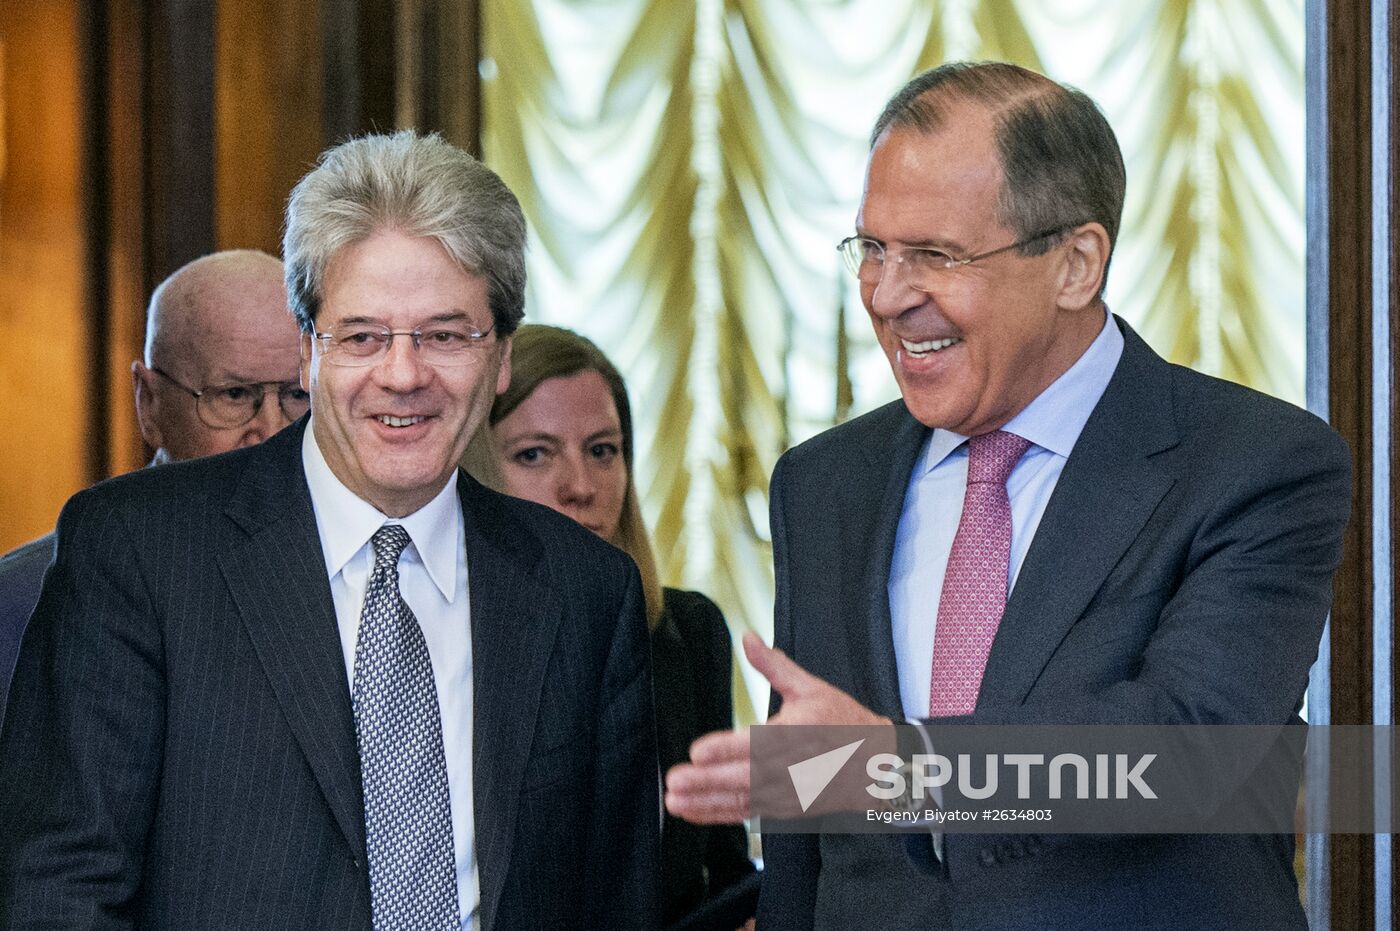 Russian Foreign Minister Servei Lavrov meets with his Italian counterpart Paolo Gentiloni